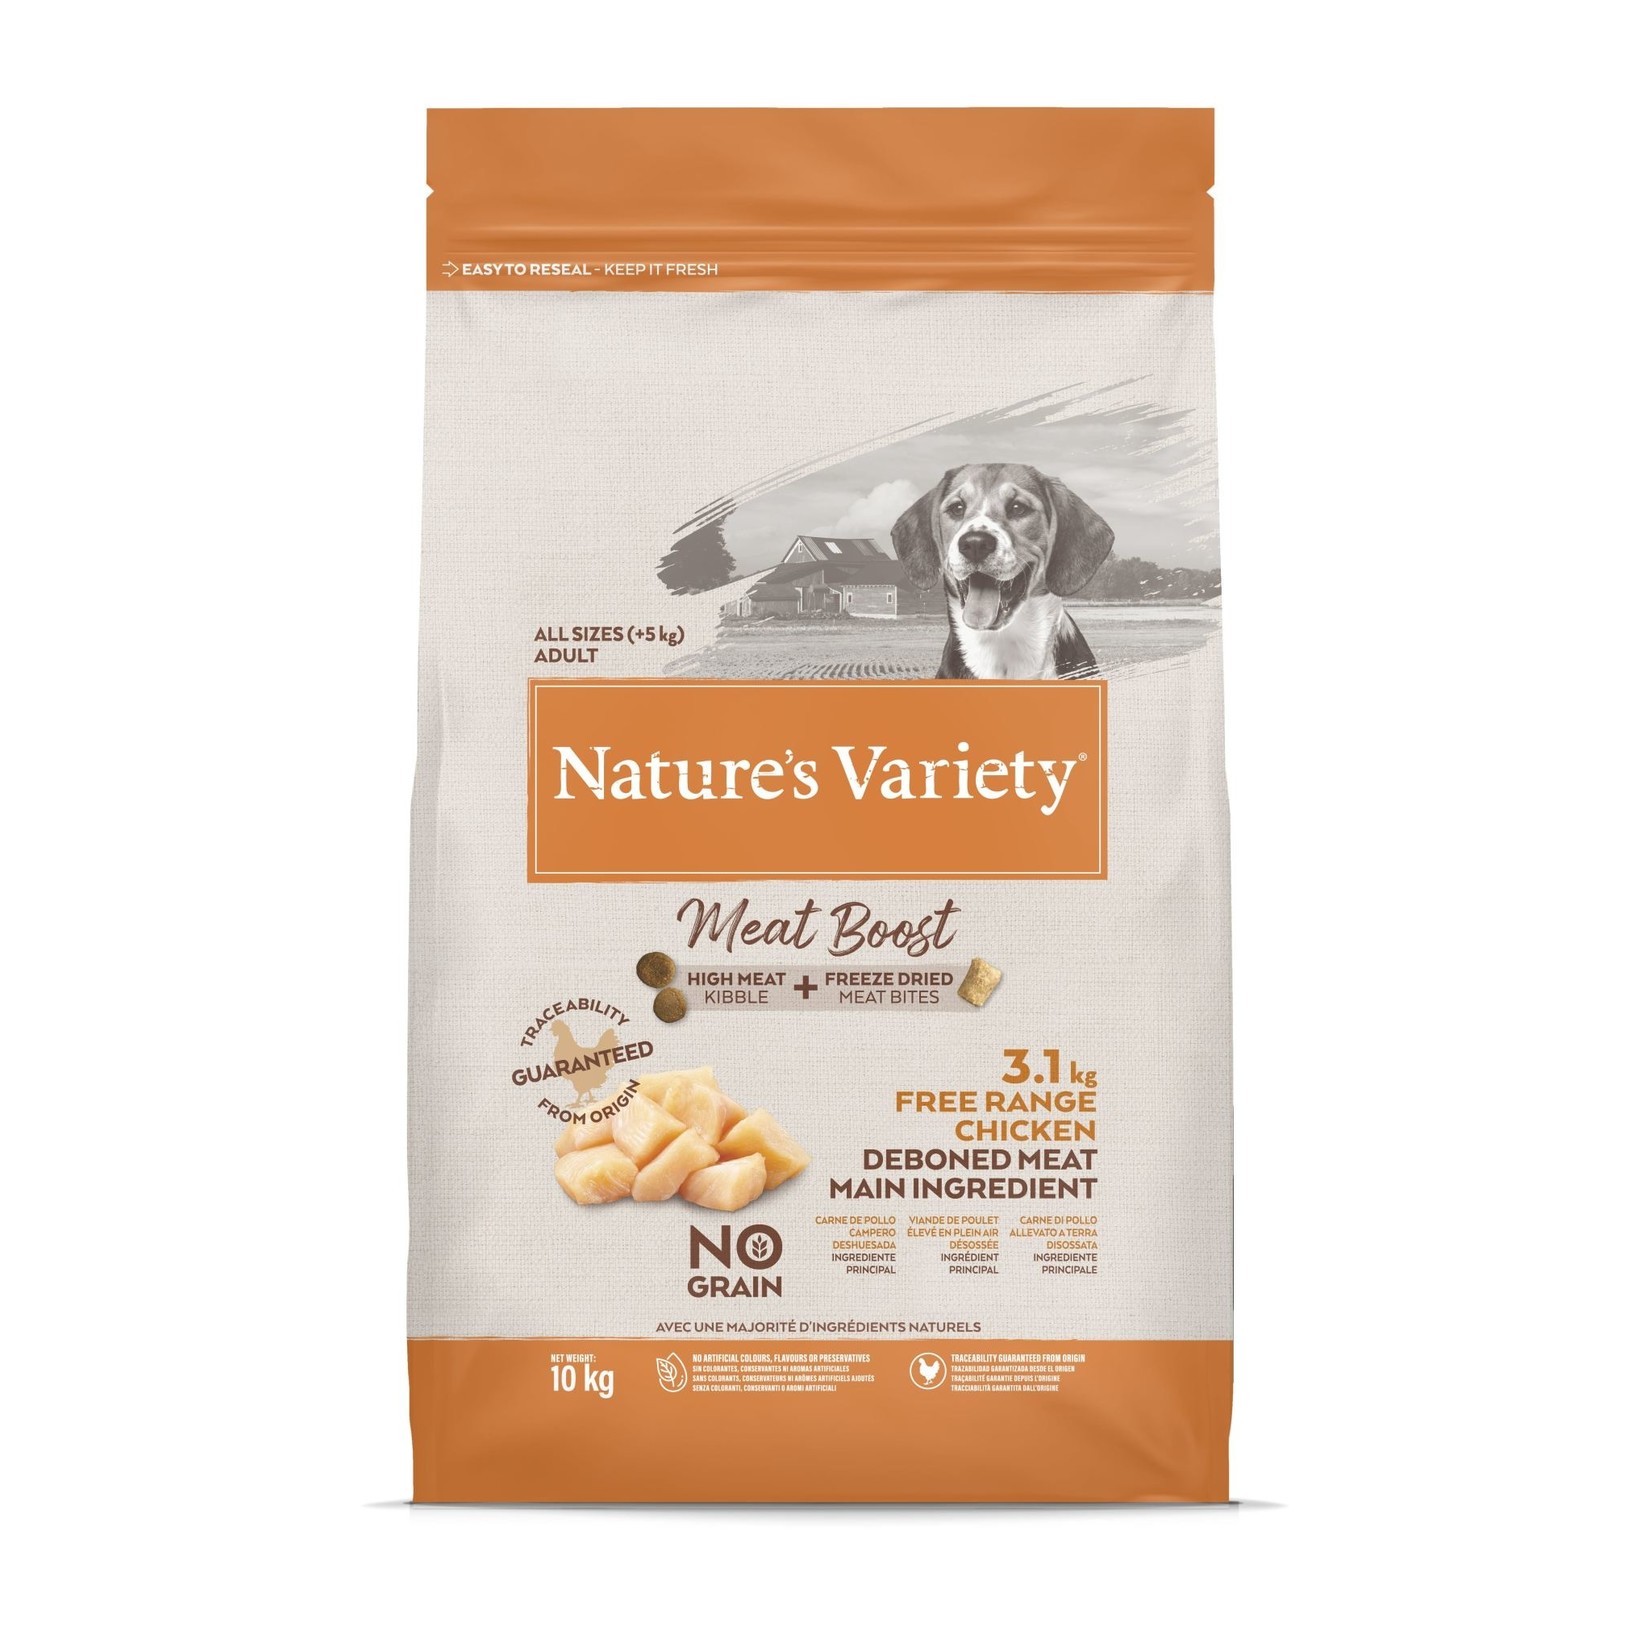 natures menu Nature's Variety Selected Dog Food Grain Free Meat Boost Free Range Chicken